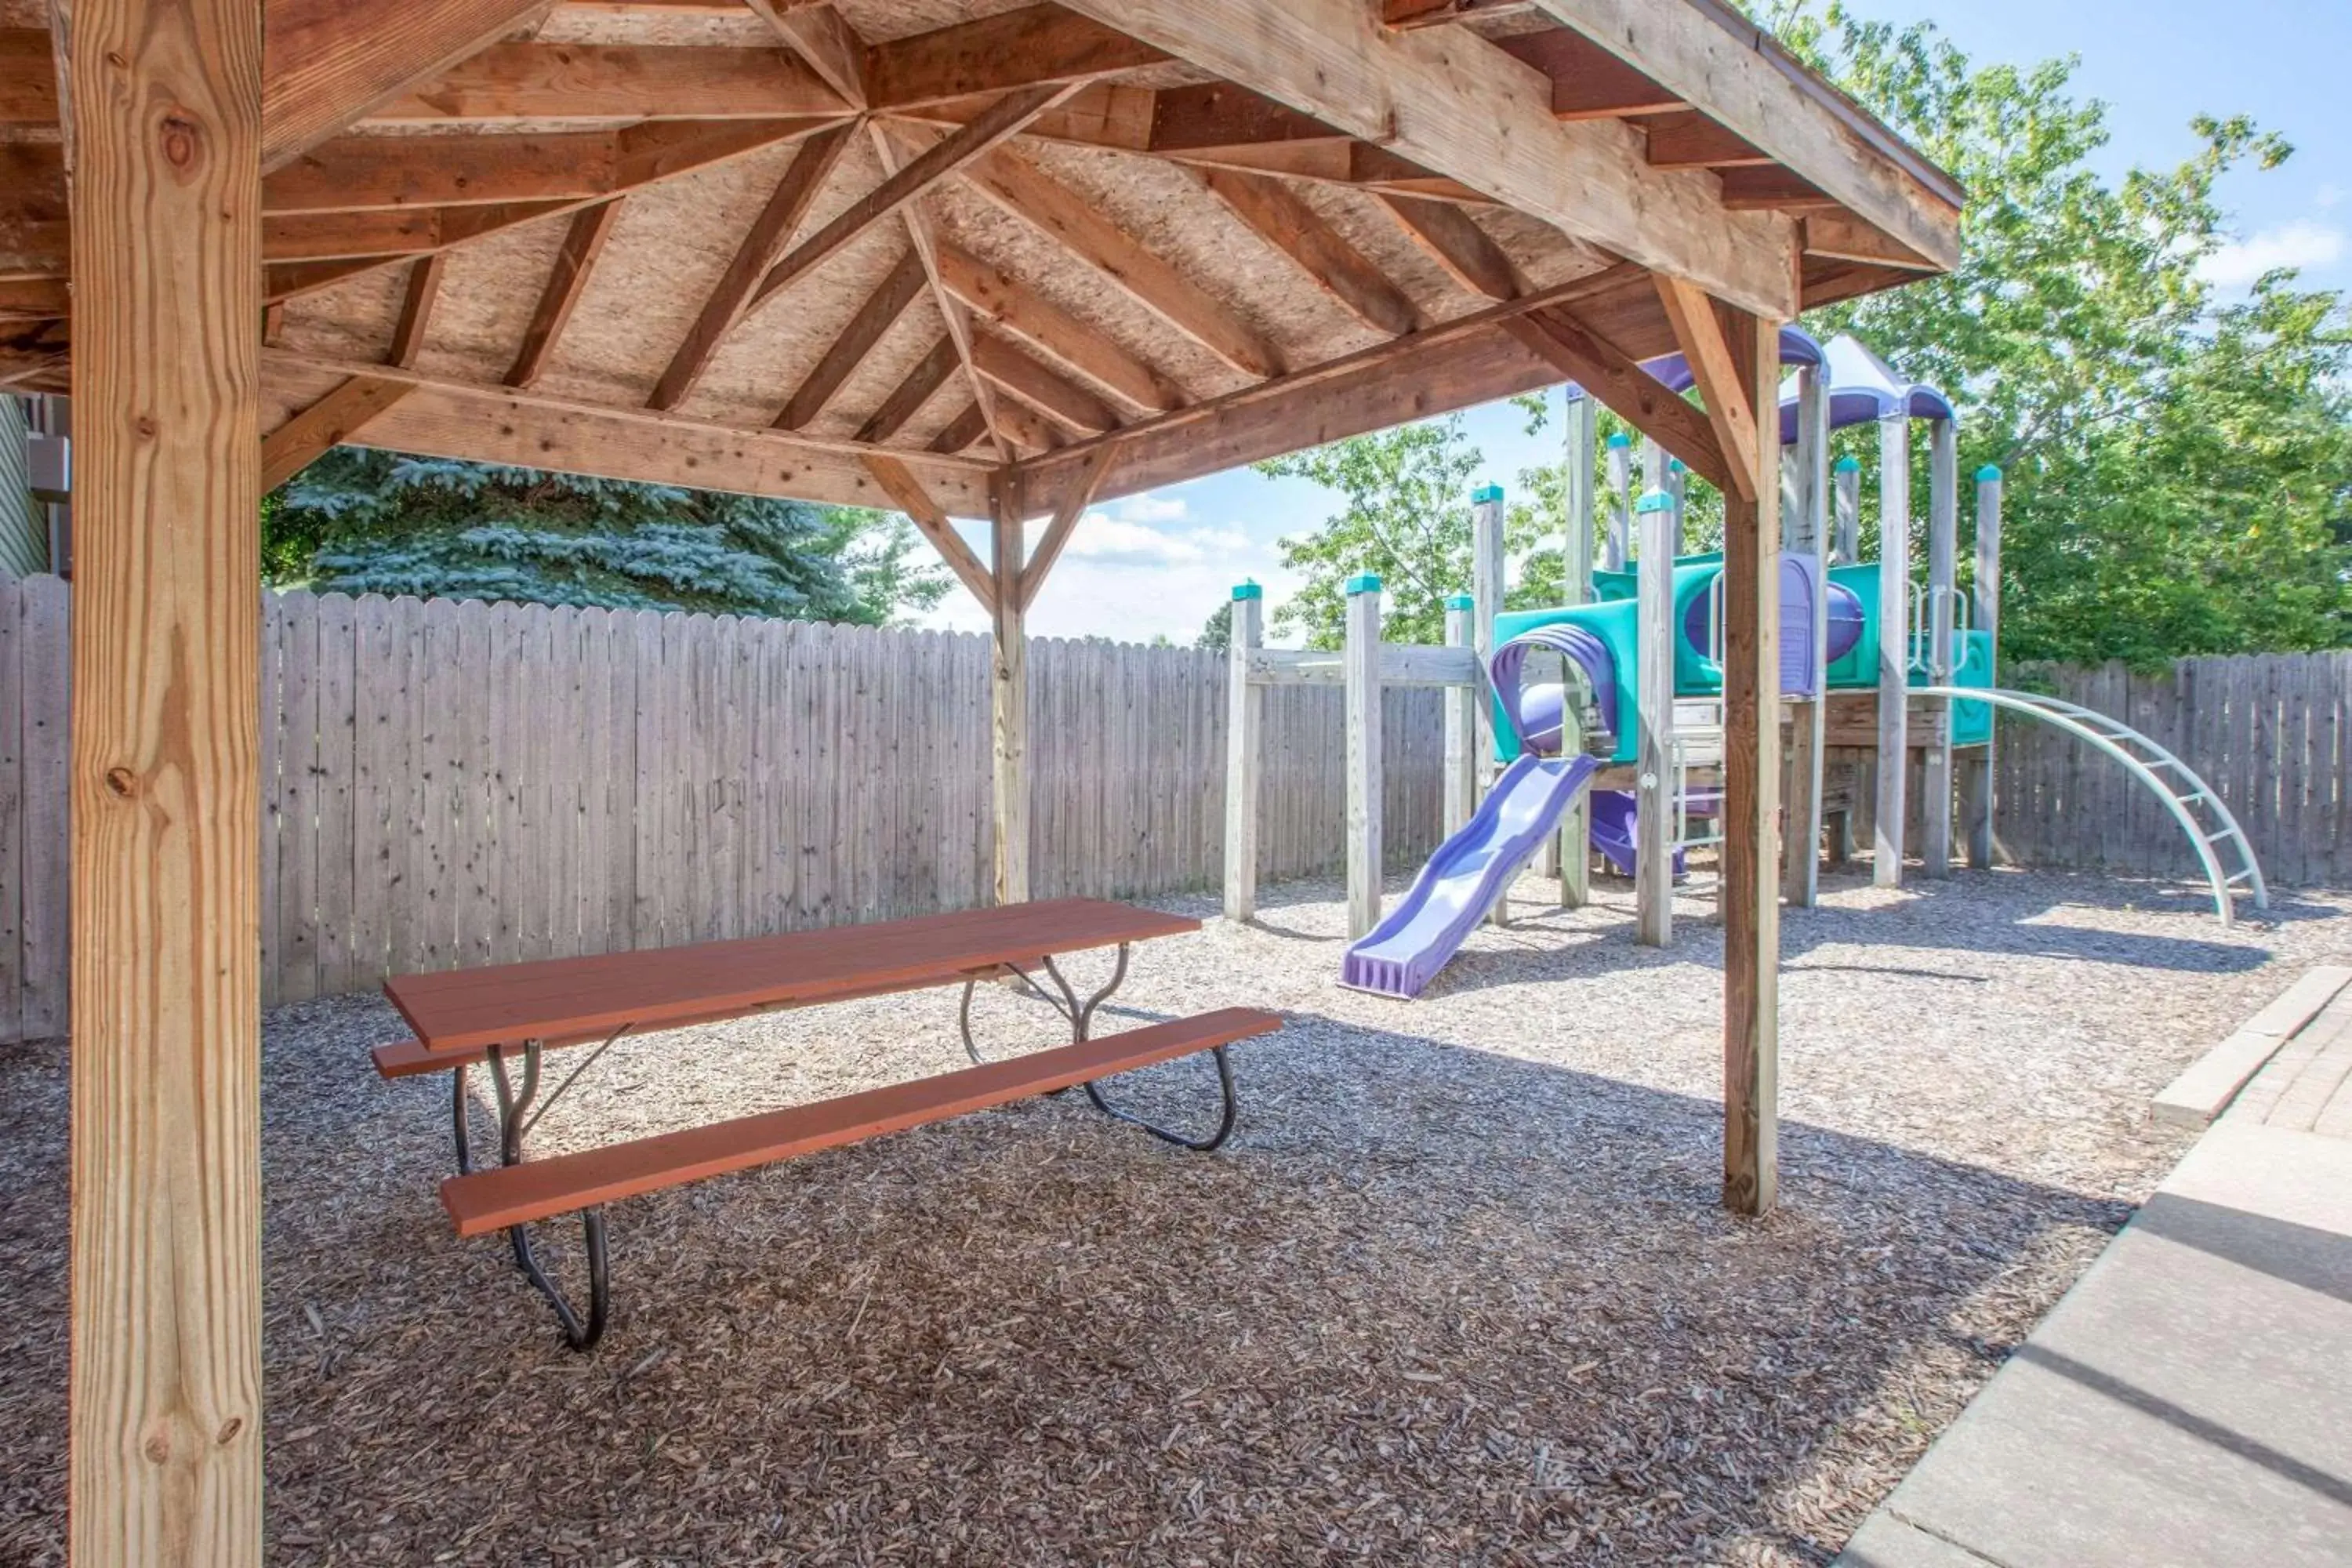 On site, Children's Play Area in Super 8 by Wyndham Houghton Lake